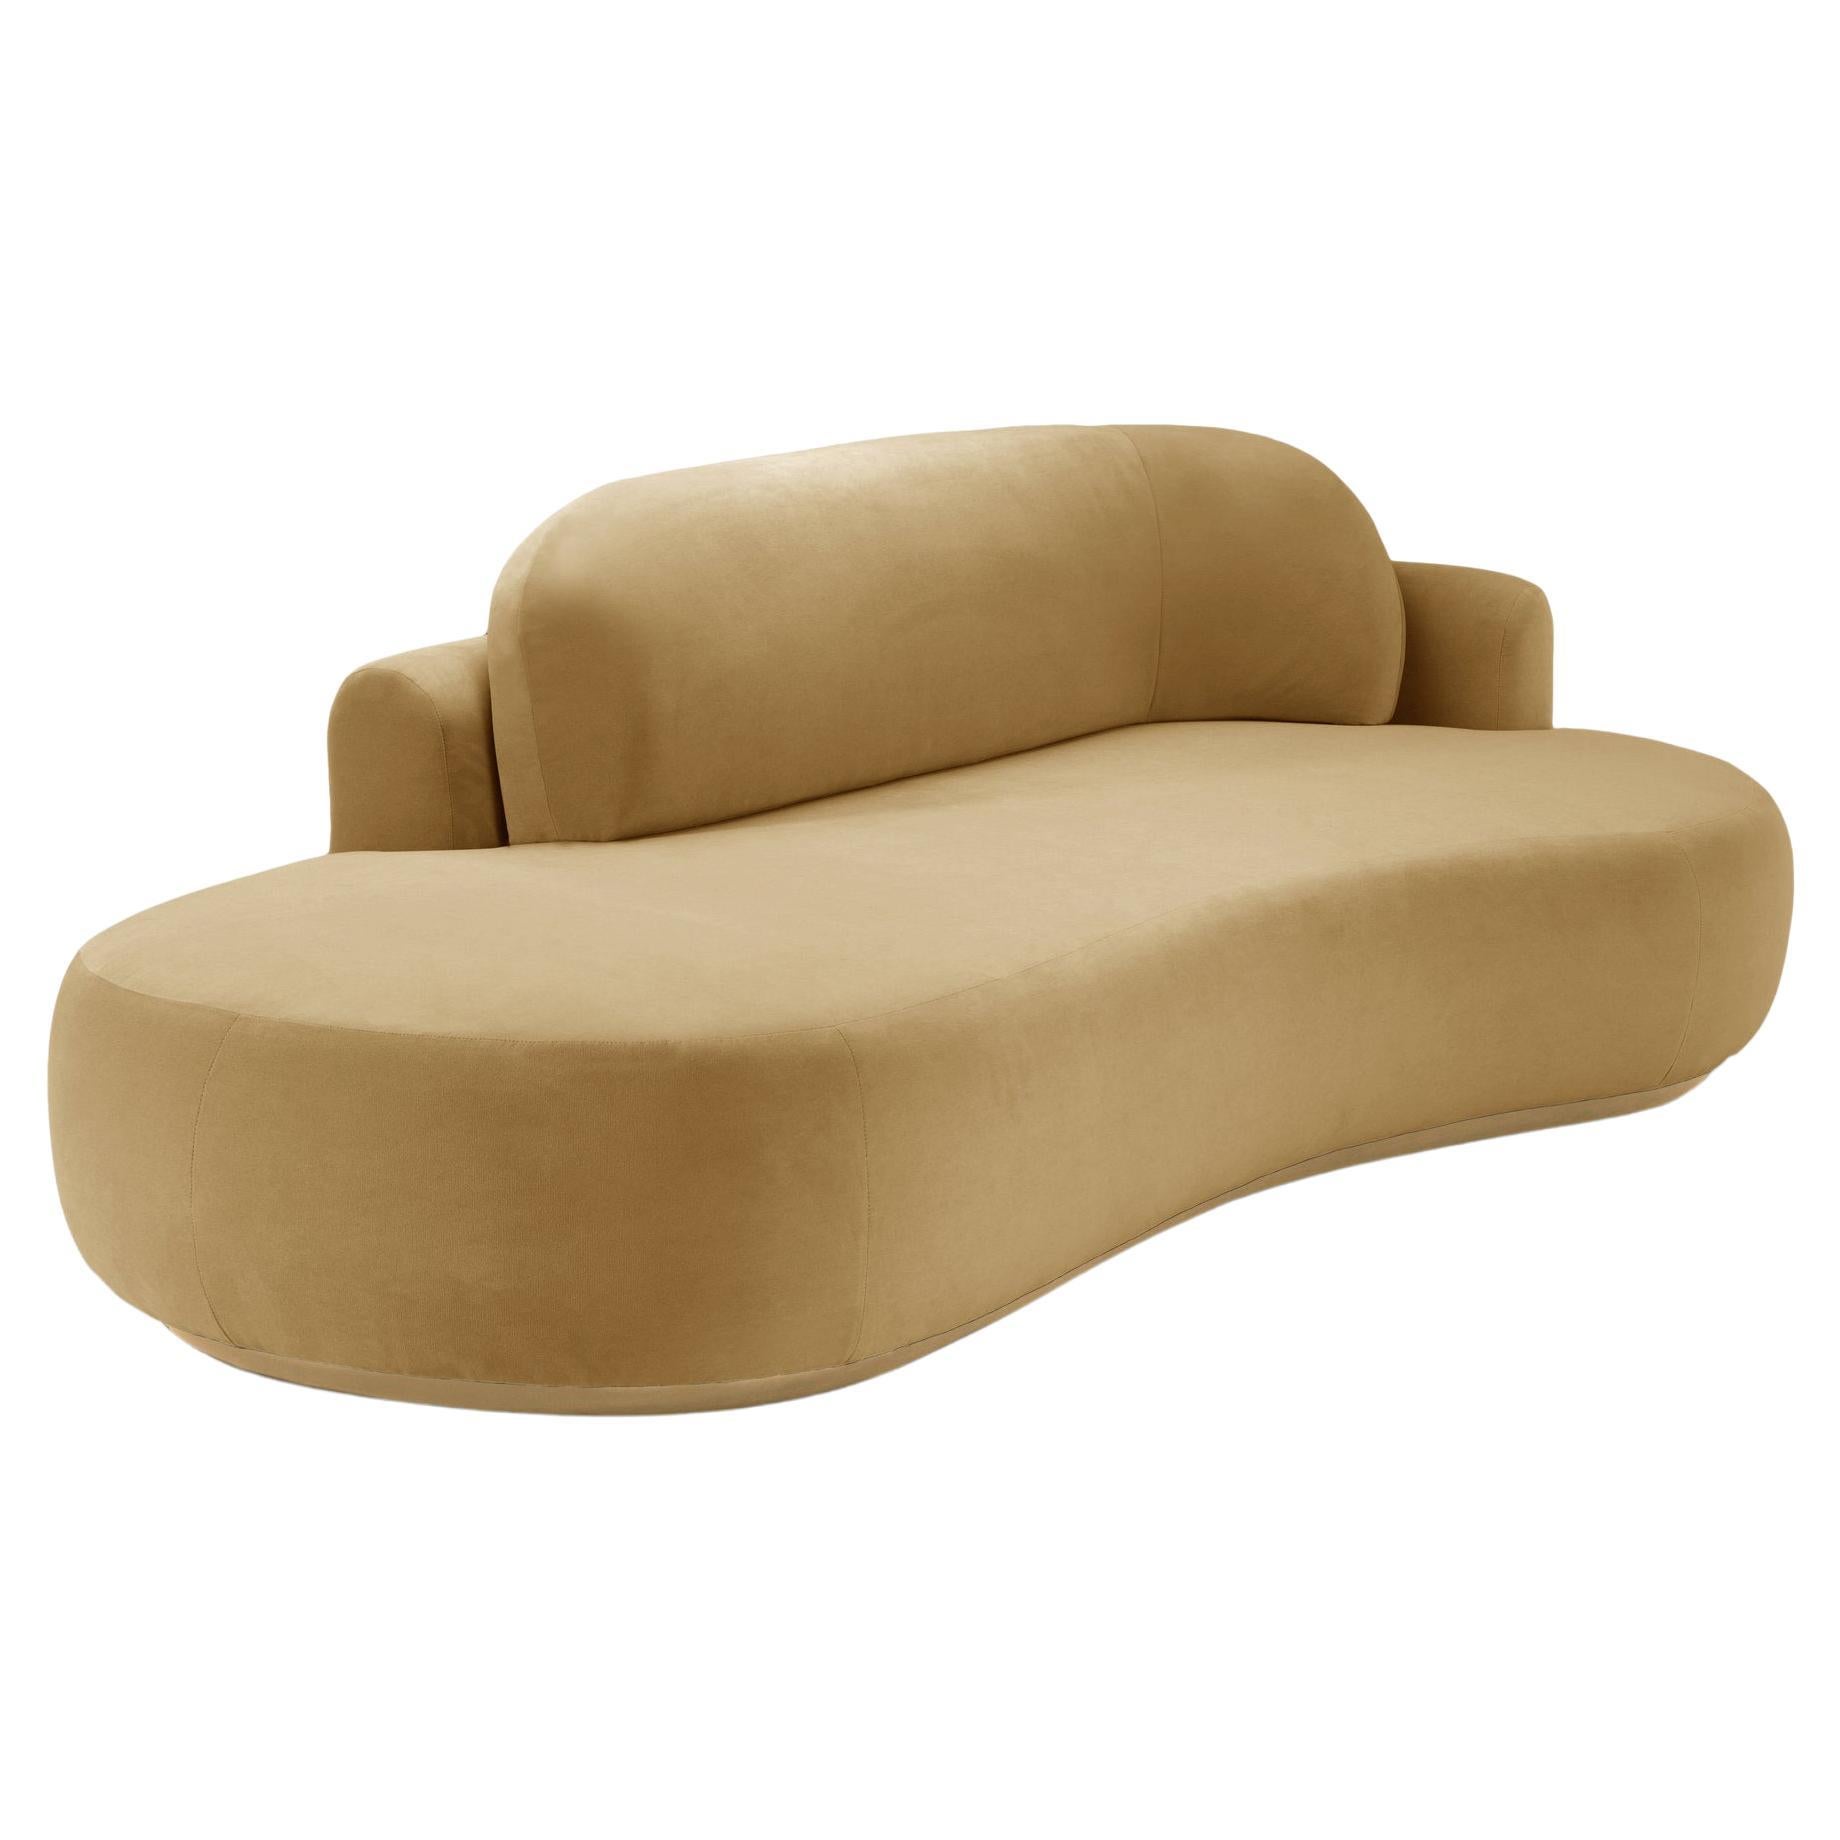 Naked Curved Sofa Single with Natural Oak and Vigo Plantain For Sale